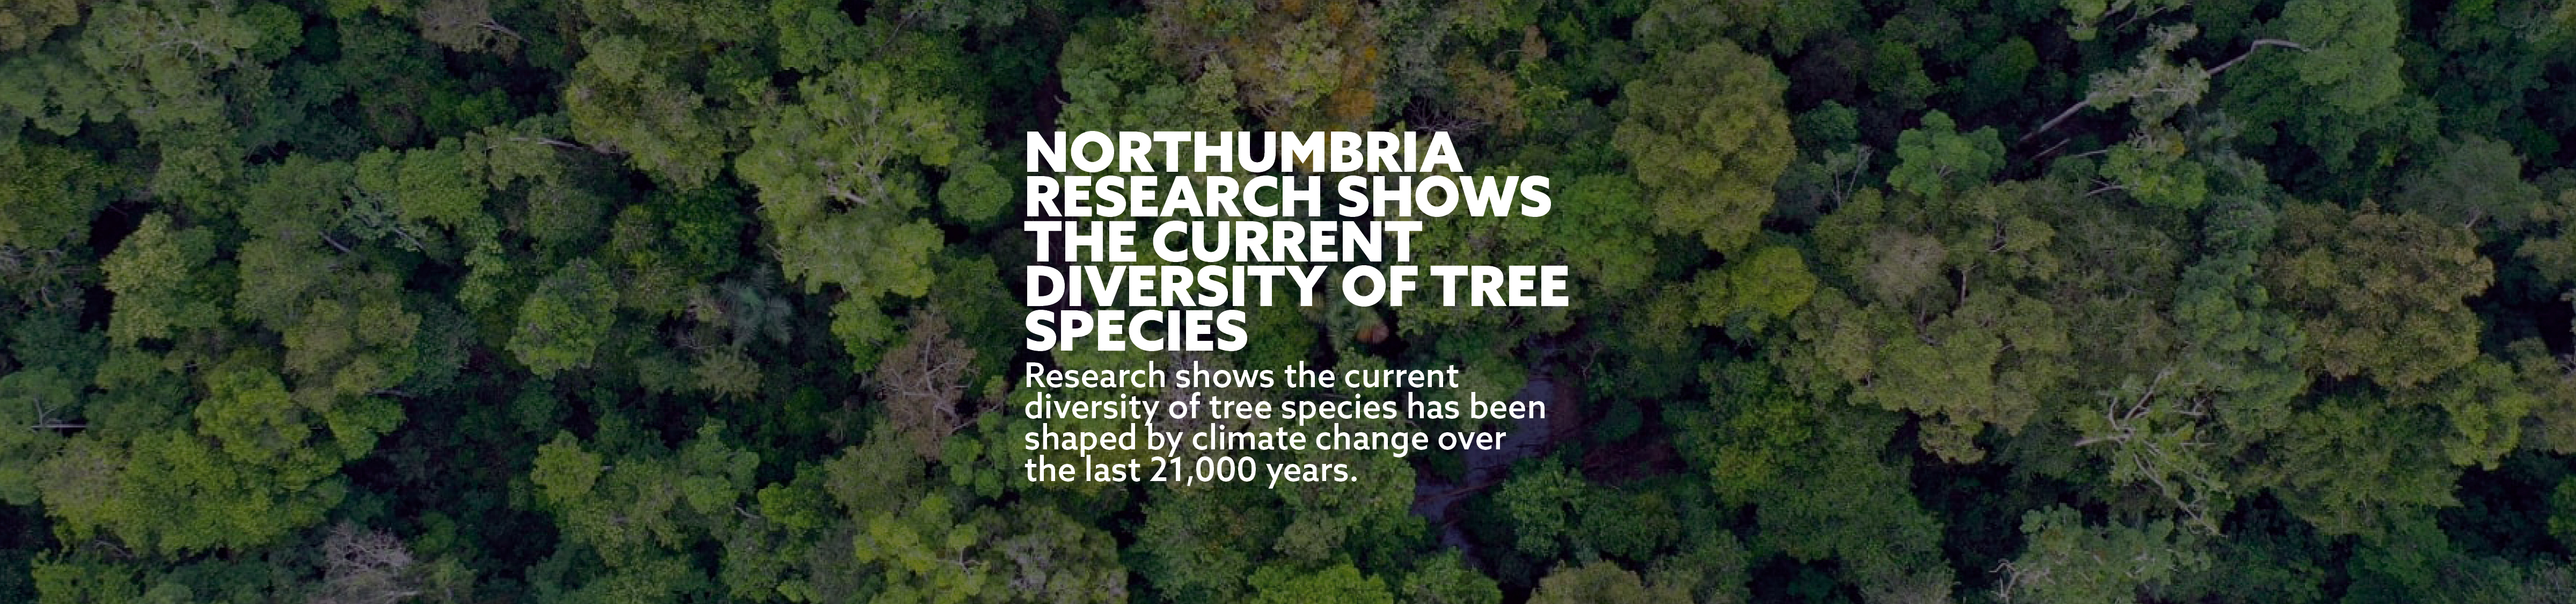 Northumbria research shows the current diversity of tree species